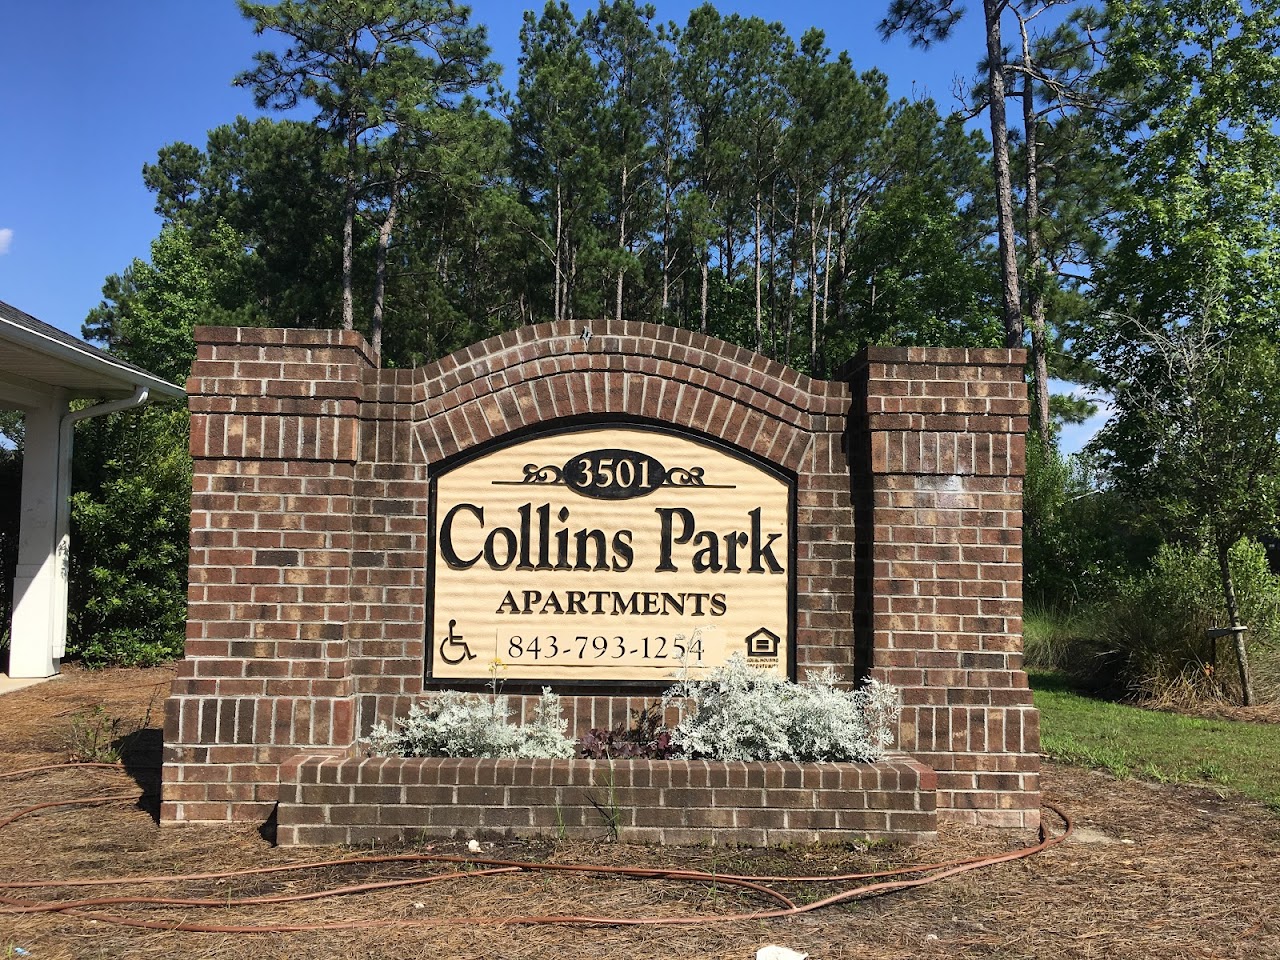 Photo of COLLINS PARK. Affordable housing located at 3501 HARBOUR LAKE DR GOOSE CREEK, SC 29445